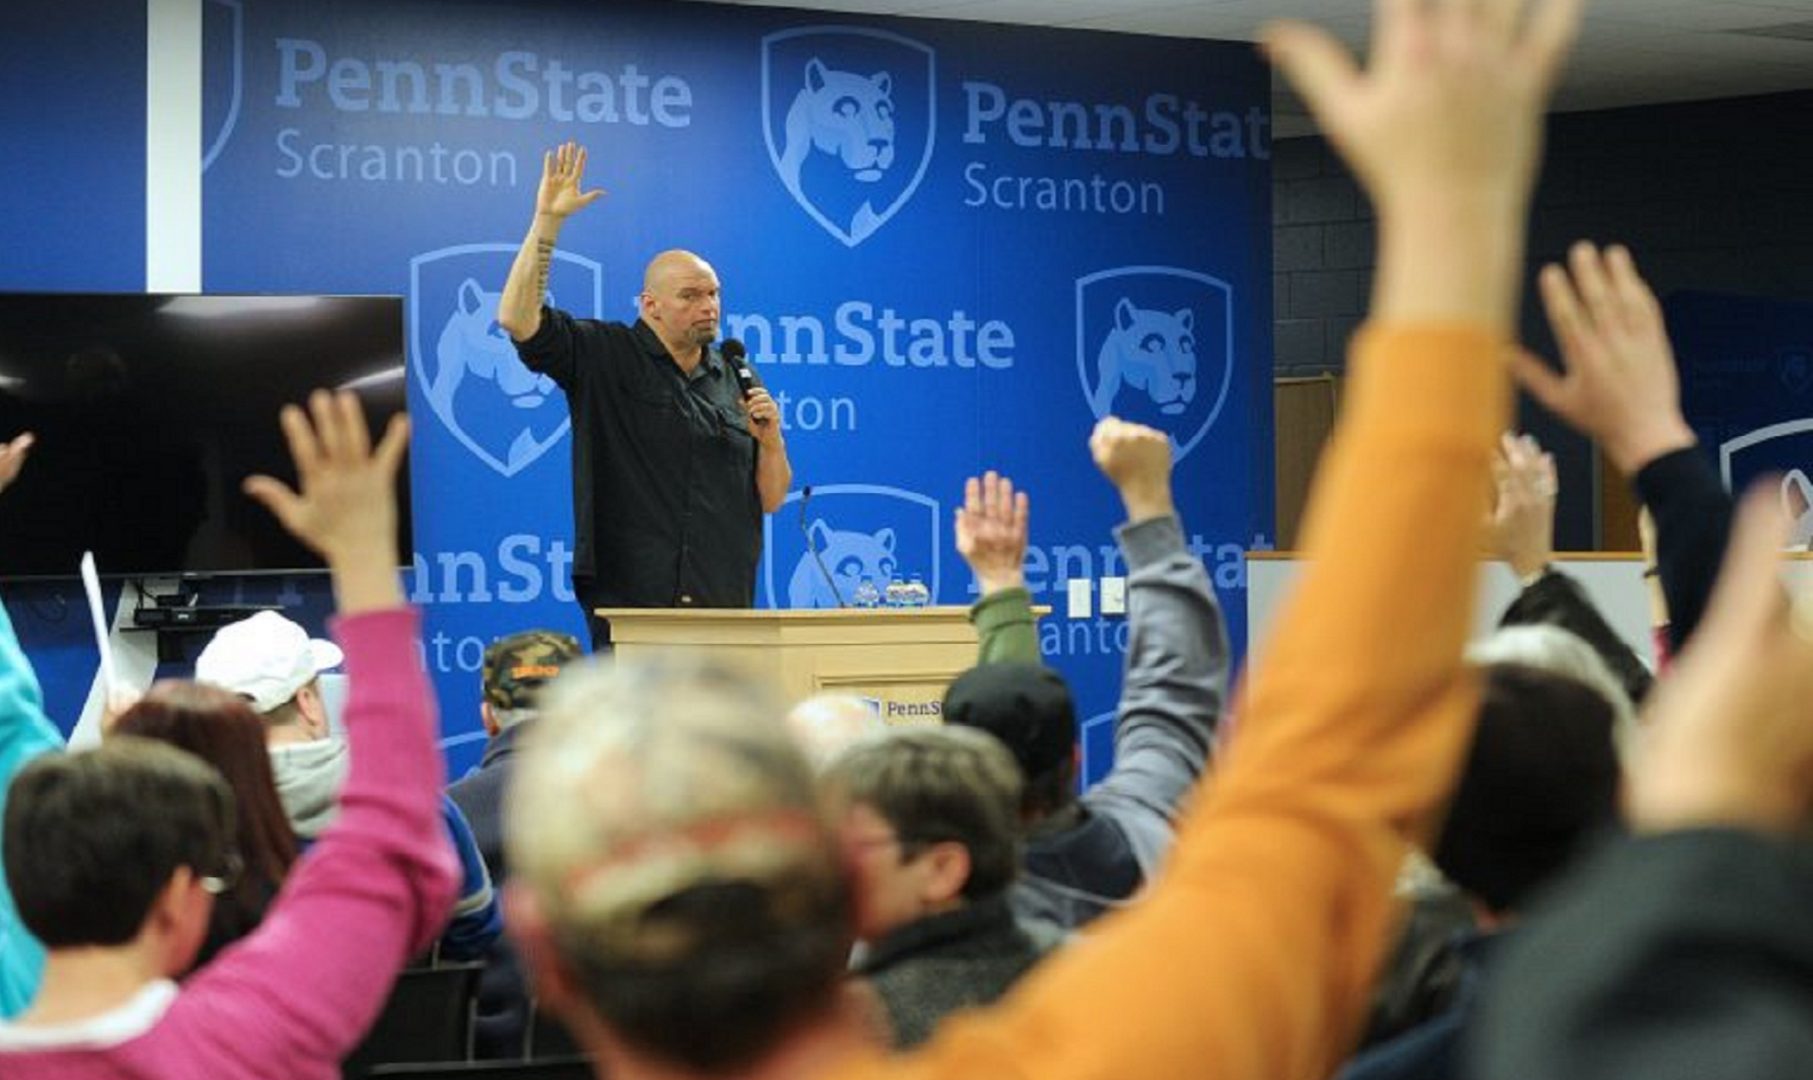 Pennsylvania Lt. Gov. John Fetterman asks for a show of hands with all in favor of adult recreational use marijuana at the conclusion of a listening session on recreational marijuana with community members Mar. 2, 2019, at Penn State Scranton in Dunmore, Pennsylvania. 